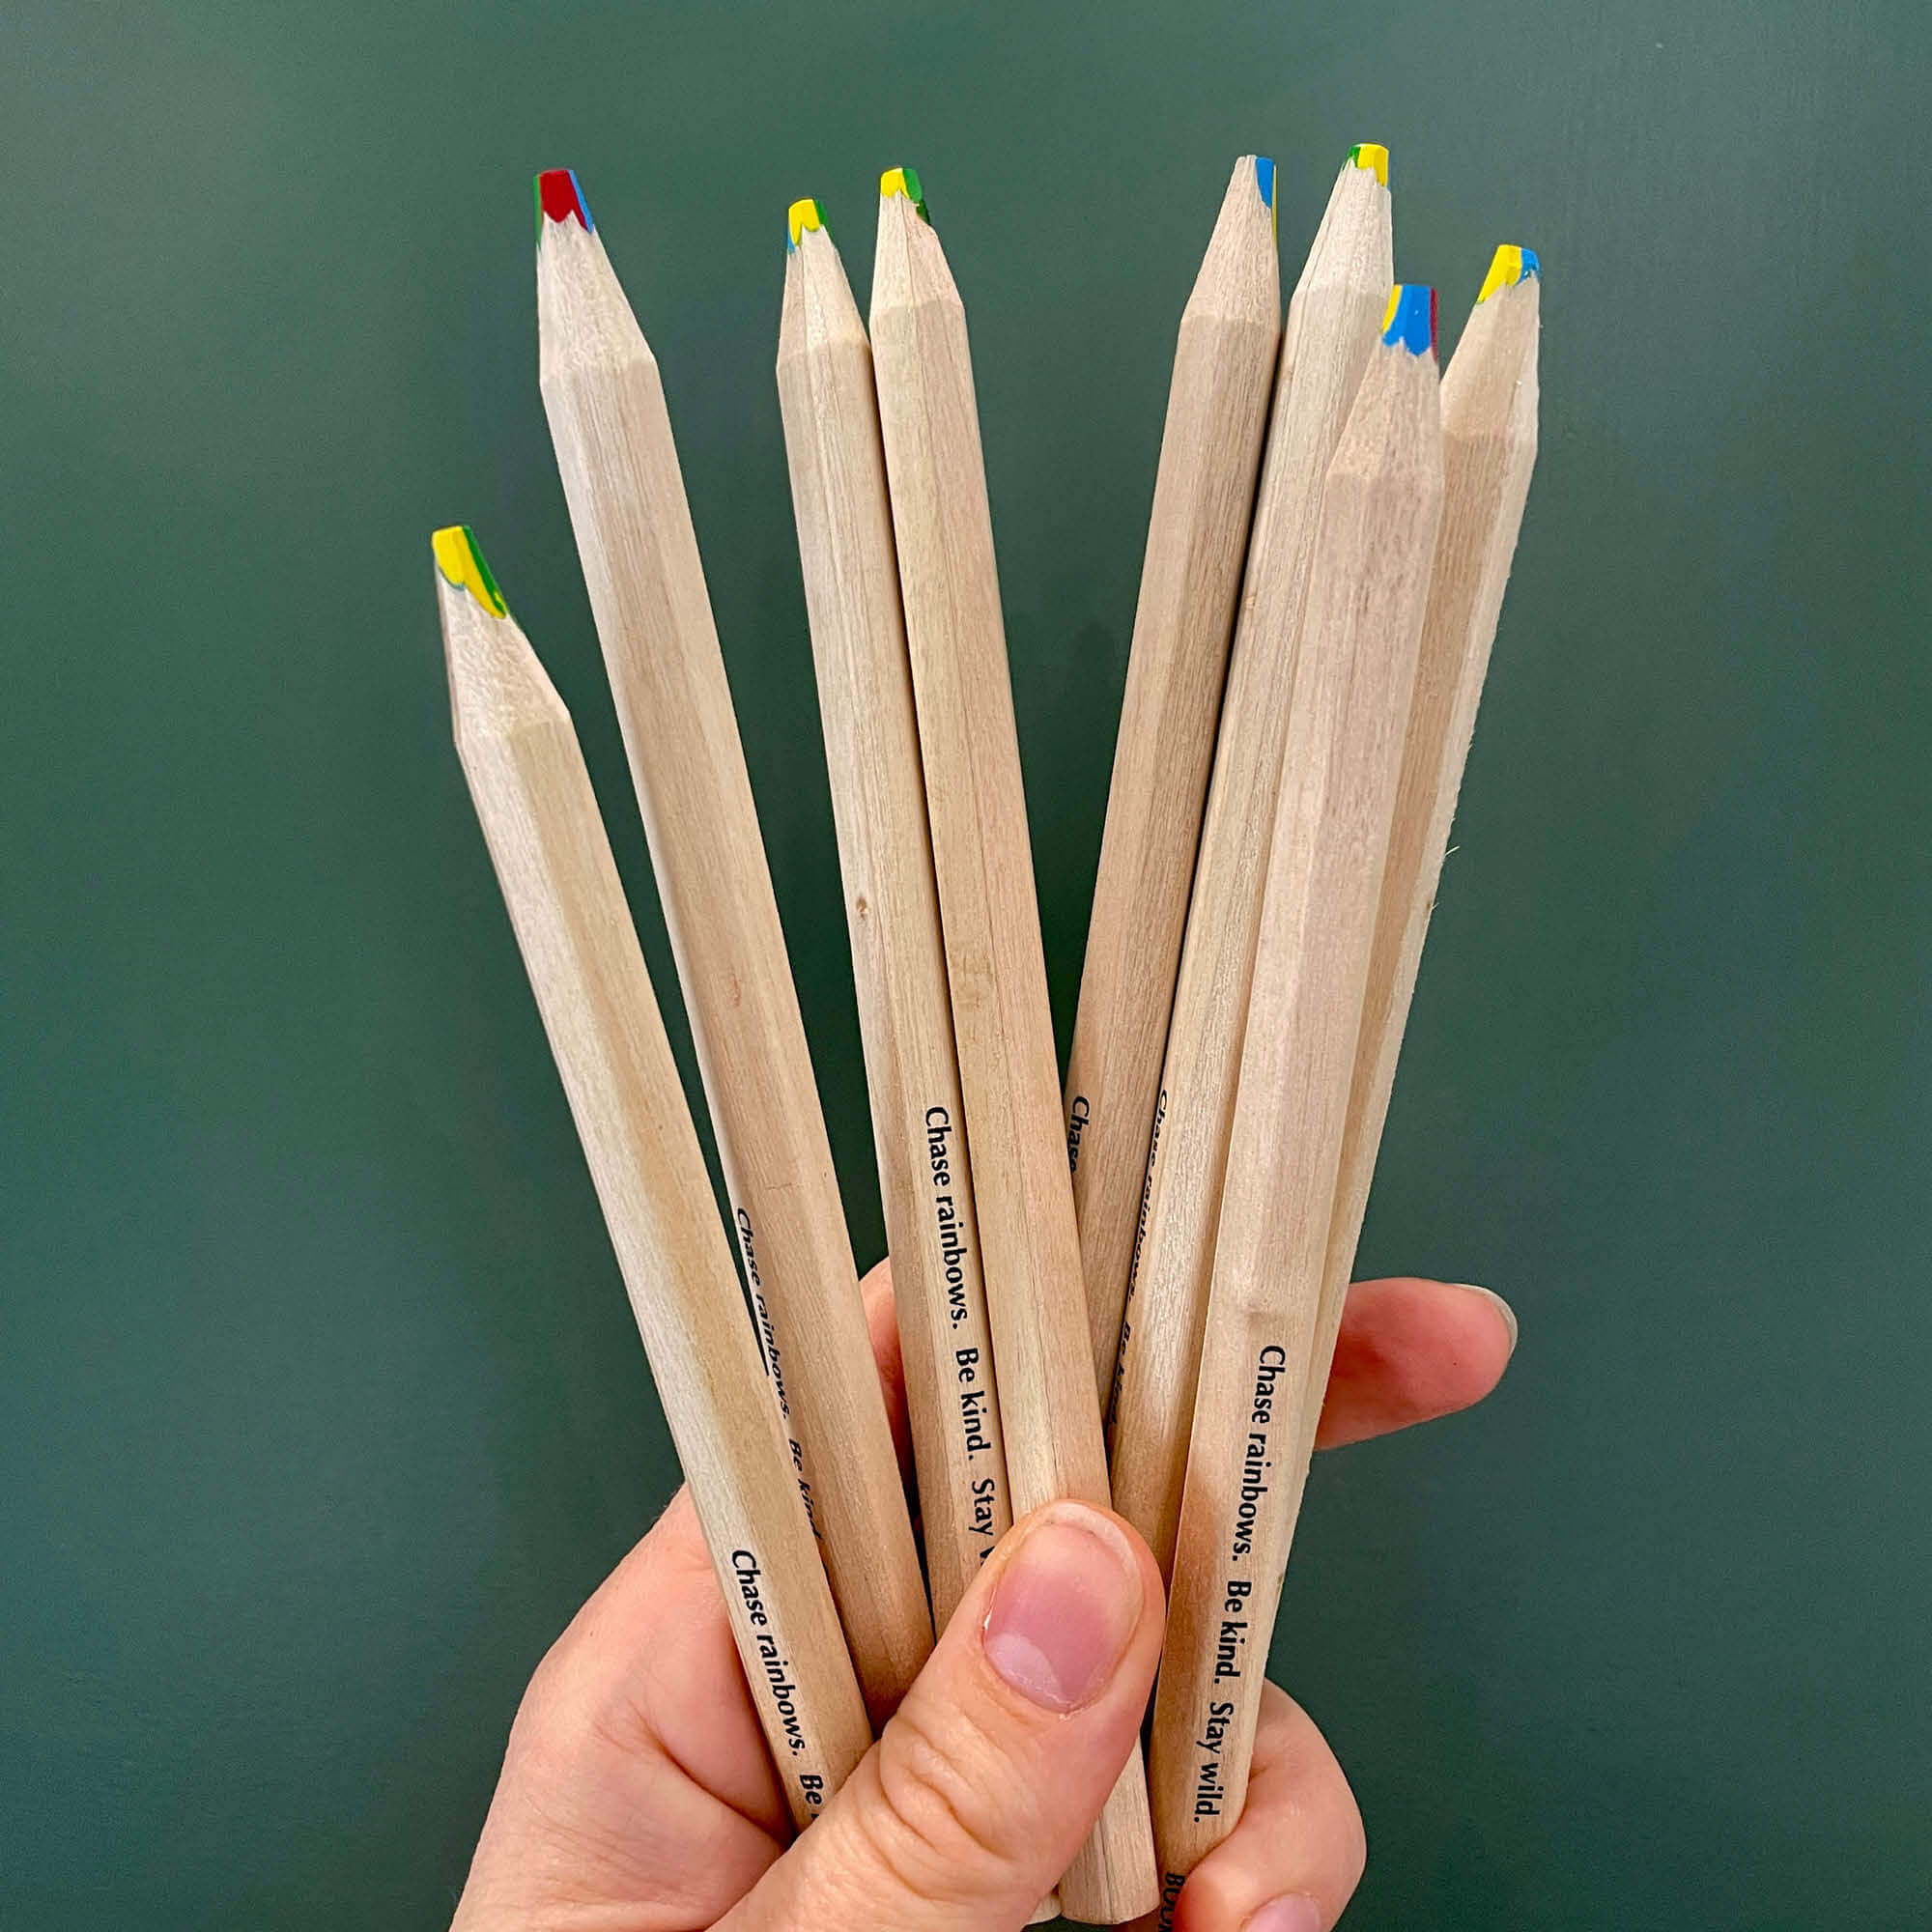 4 colour rainbow pencil with thick FSC certified timber casing for easy grip. Engraved with quote - Chase rainbows. Be kind. Stay wild. And the Your Wild Books logo.